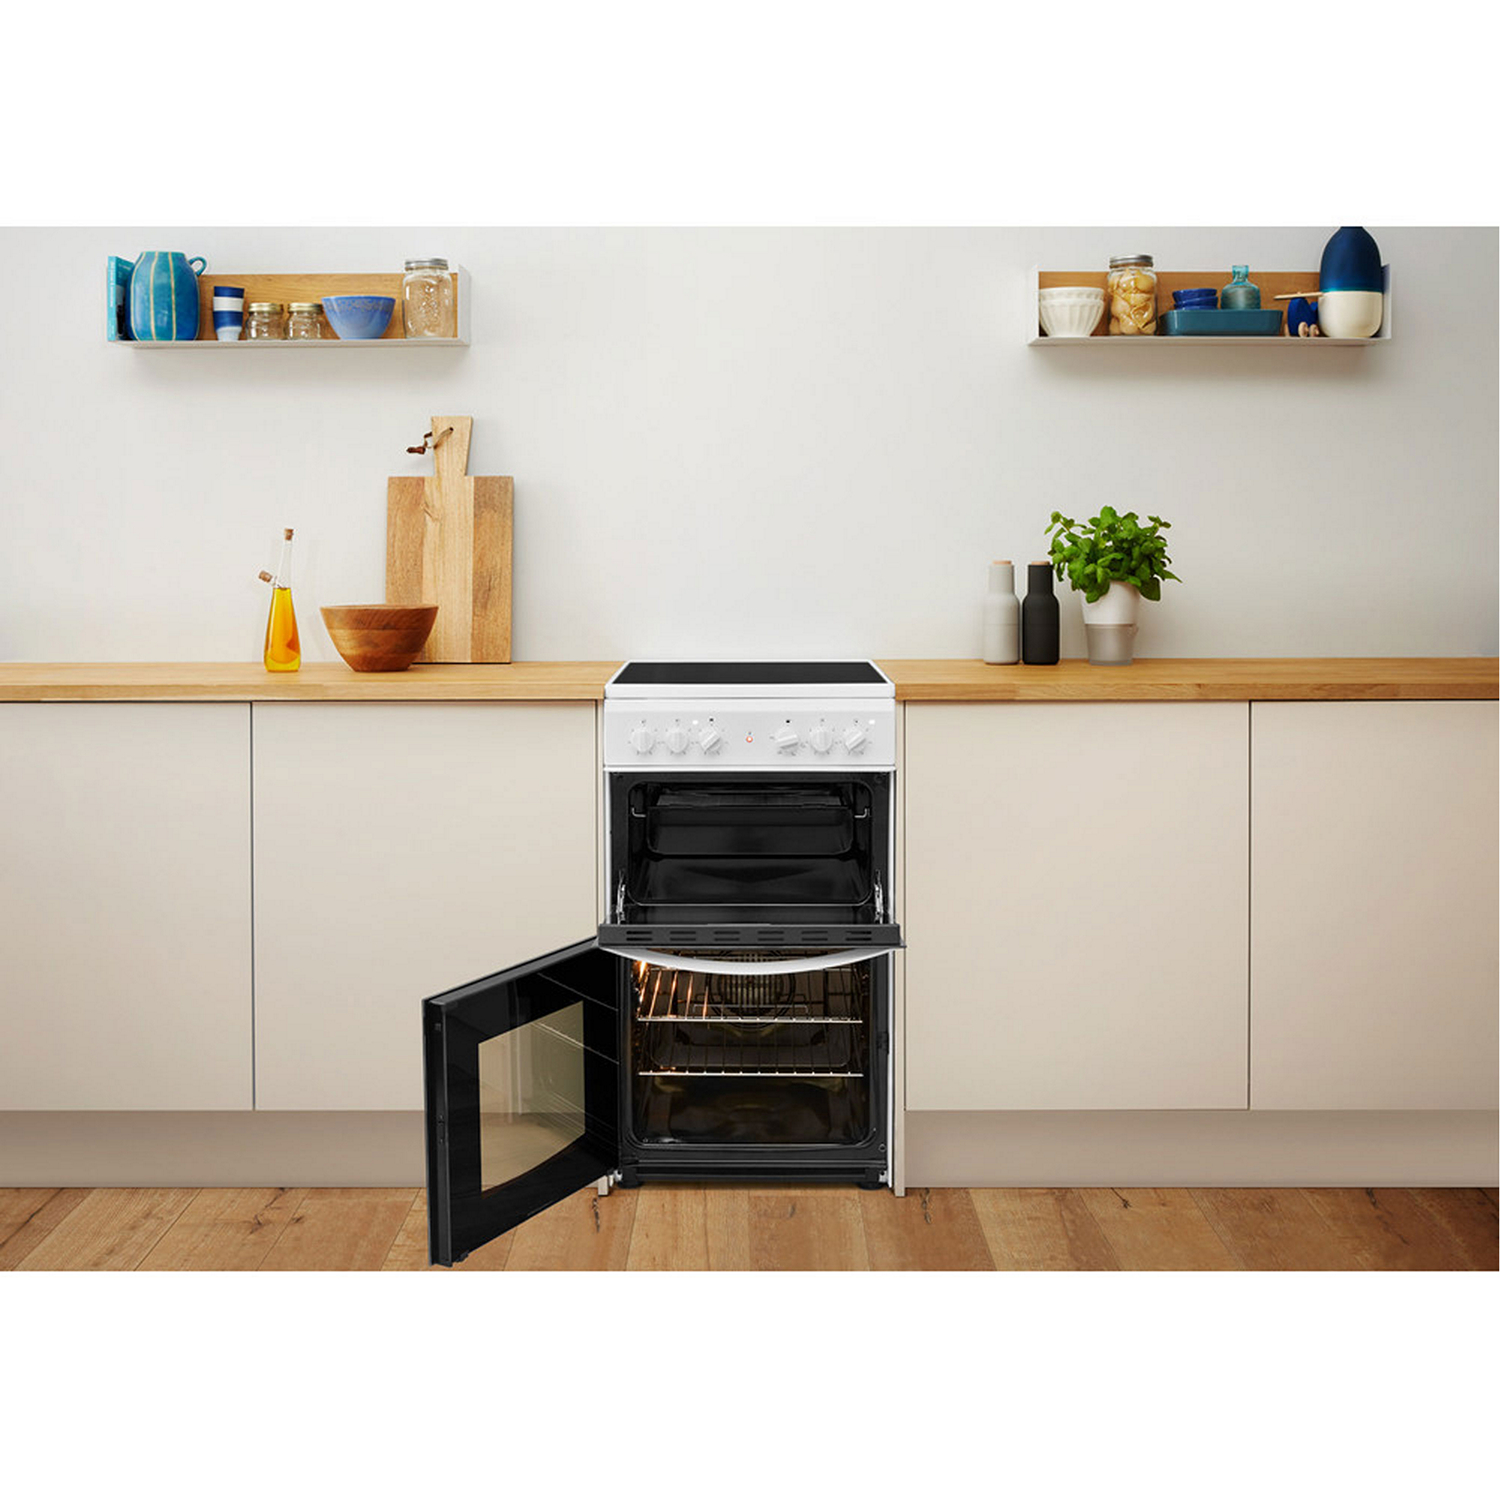 Indesit 50cm Electric Twin Cooker